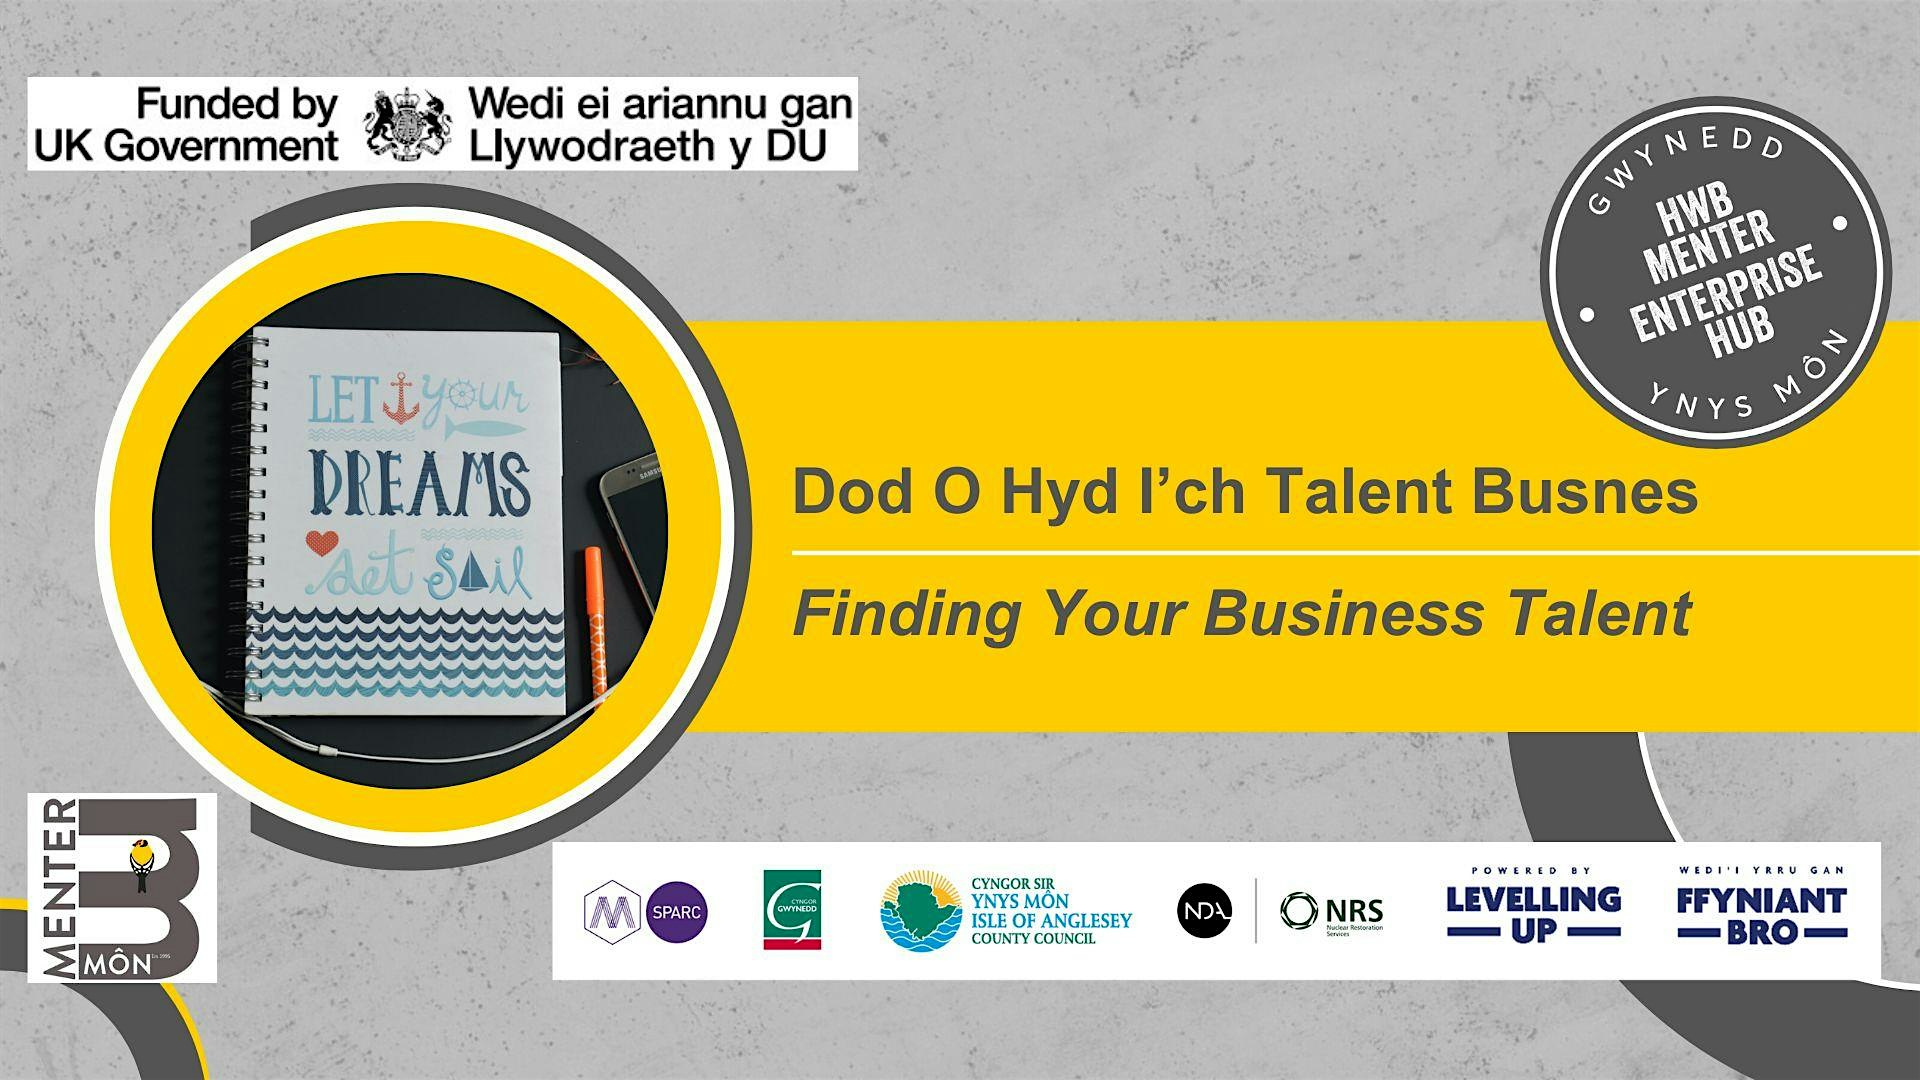 Dod o Hyd i'ch Talent Busnes / Finding your Business Talent